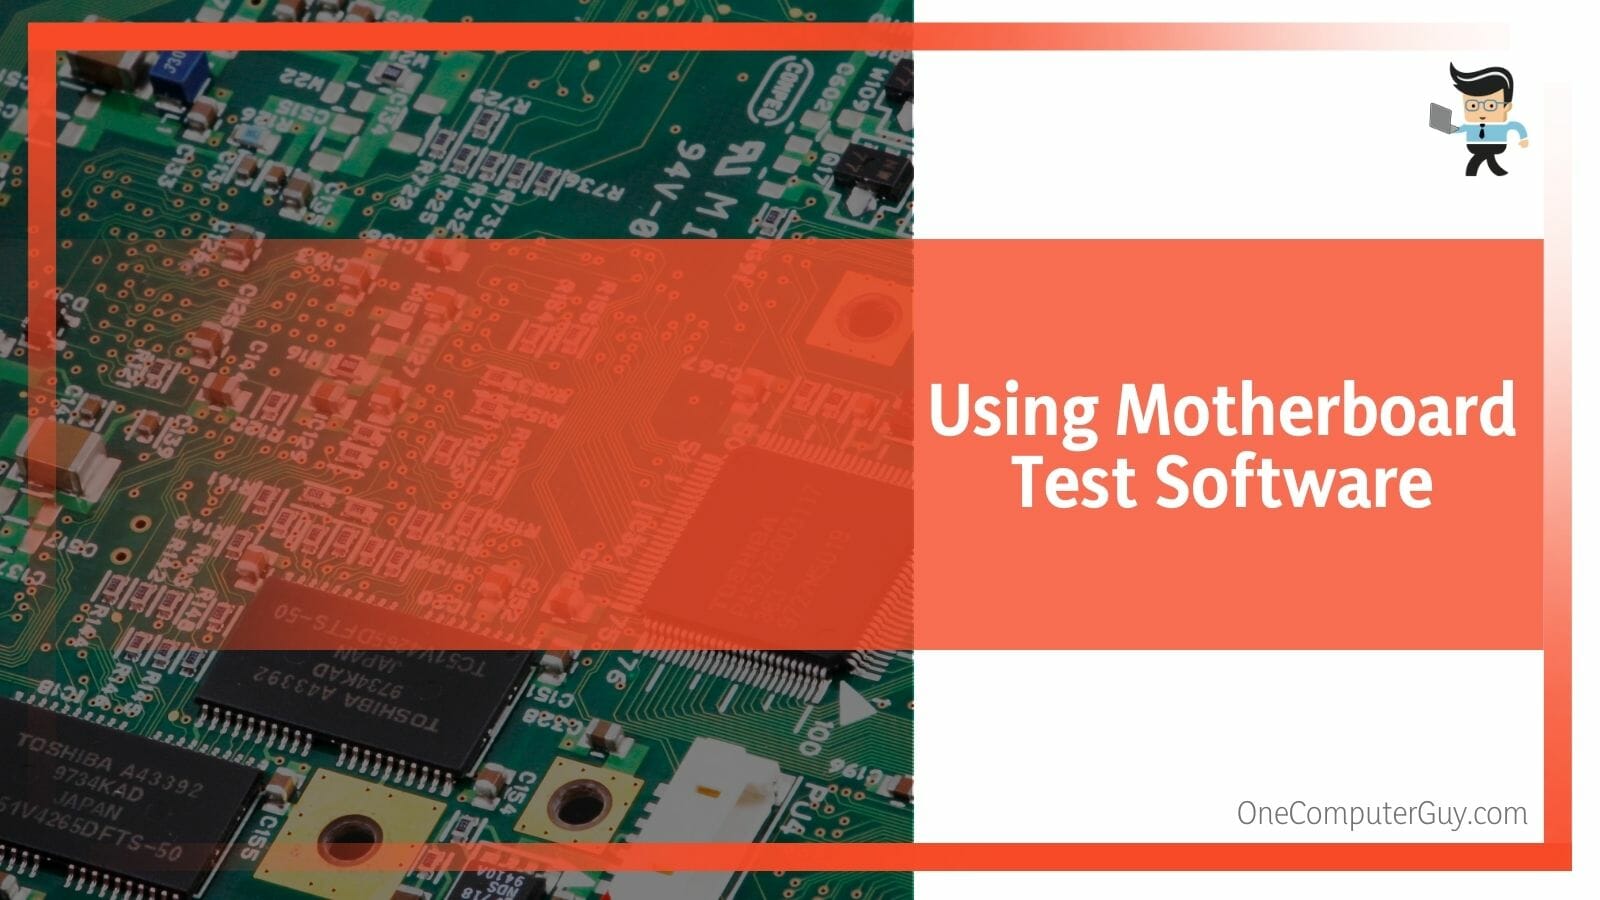 Using Motherboard Test Software